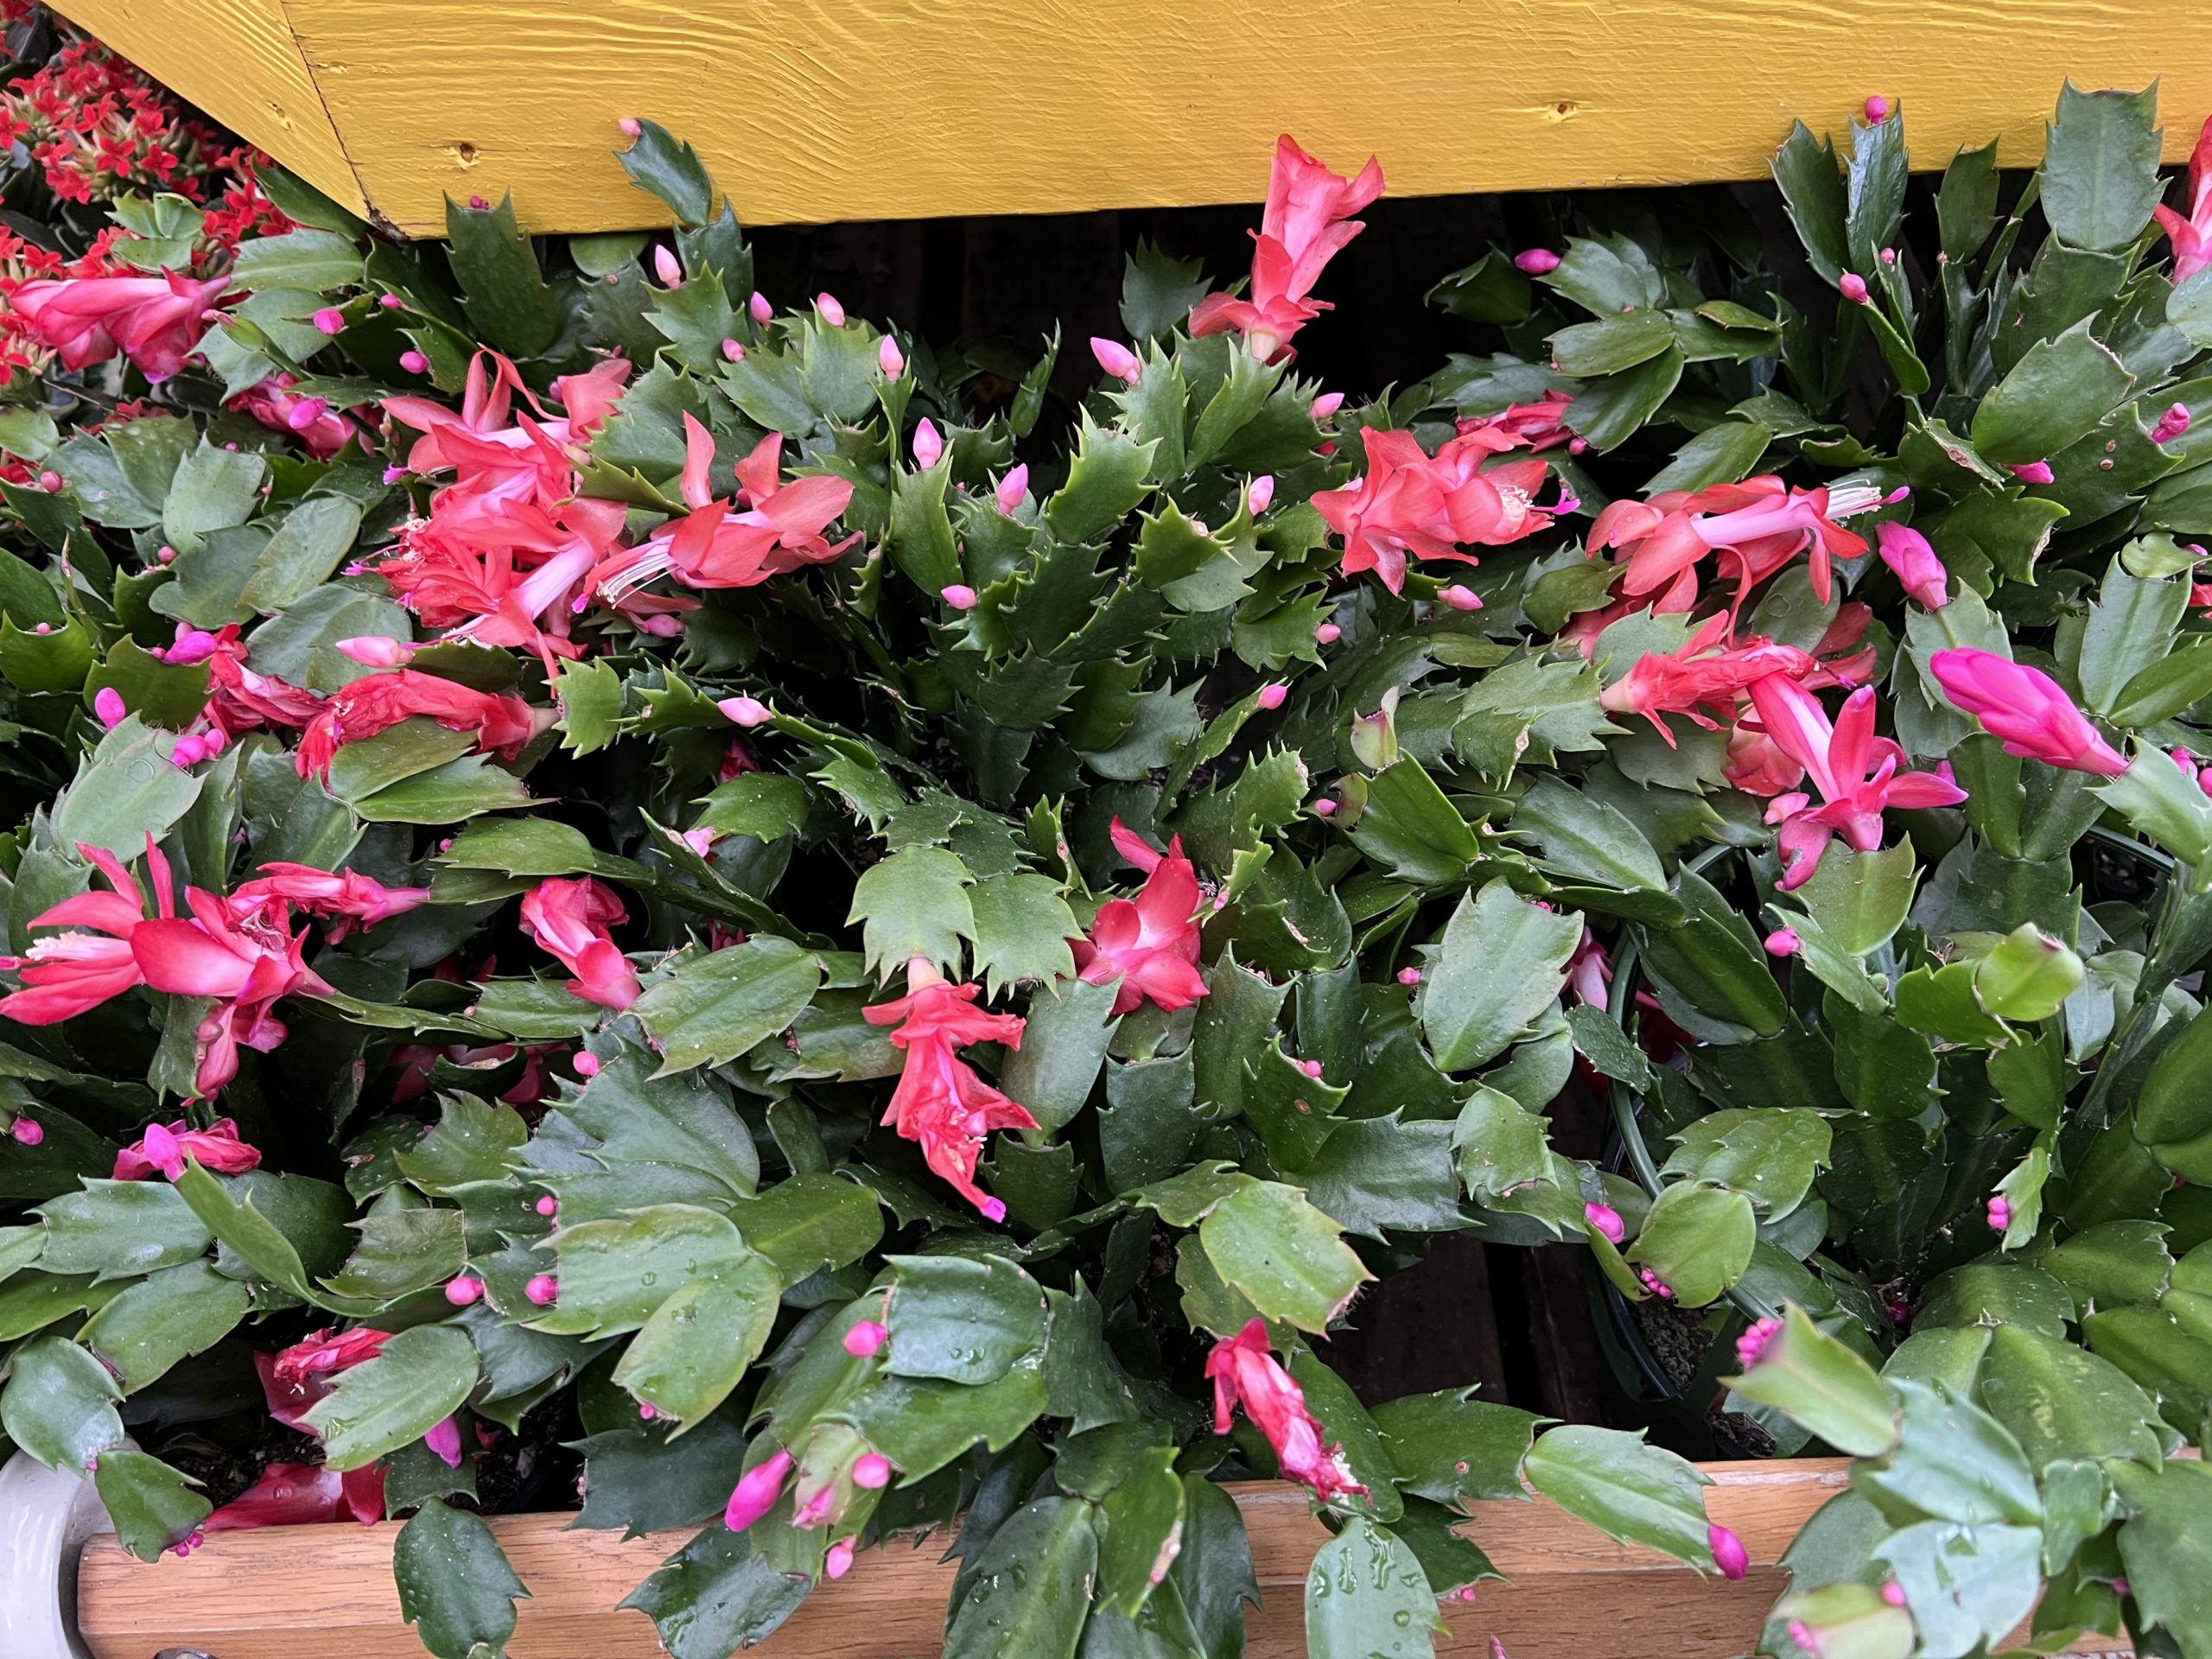 Christmas cactus make great holiday plants and, if left in the same spot, they’ll flower every year at the holidays with little to no care.